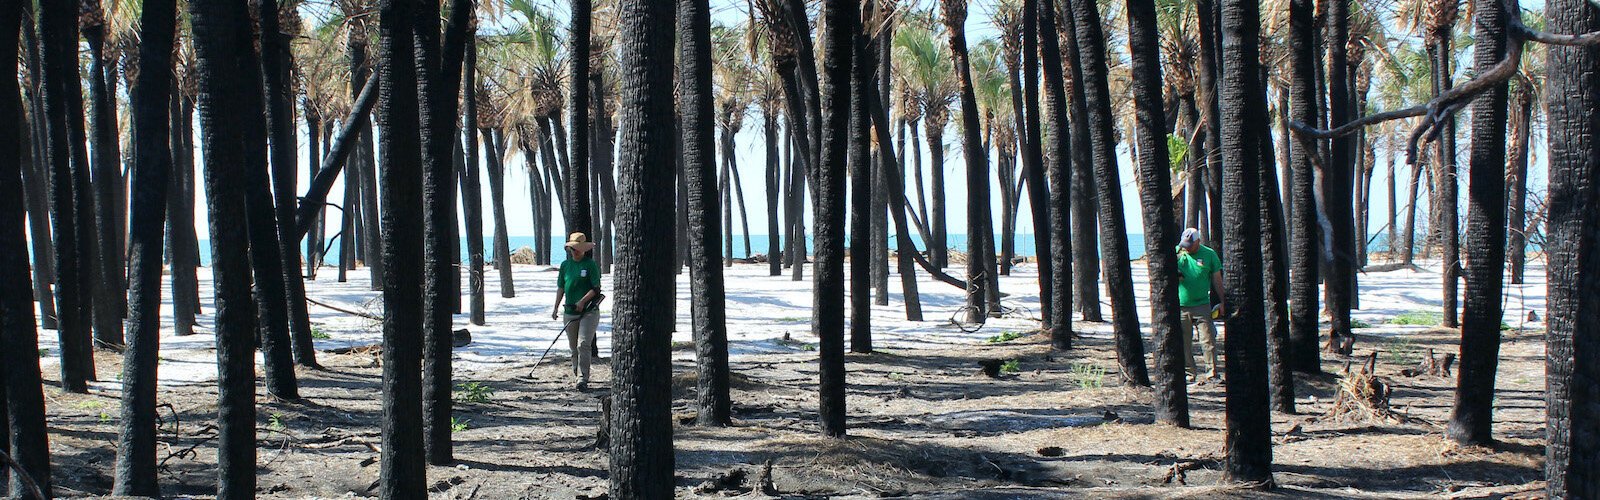 Archaeologists working for the Seminole Tribe surveyed Egmont Key in 2016 after a wildfire cleared underbrush. Still, the exact location of Seminole internment from 1855-1858 is unknown.